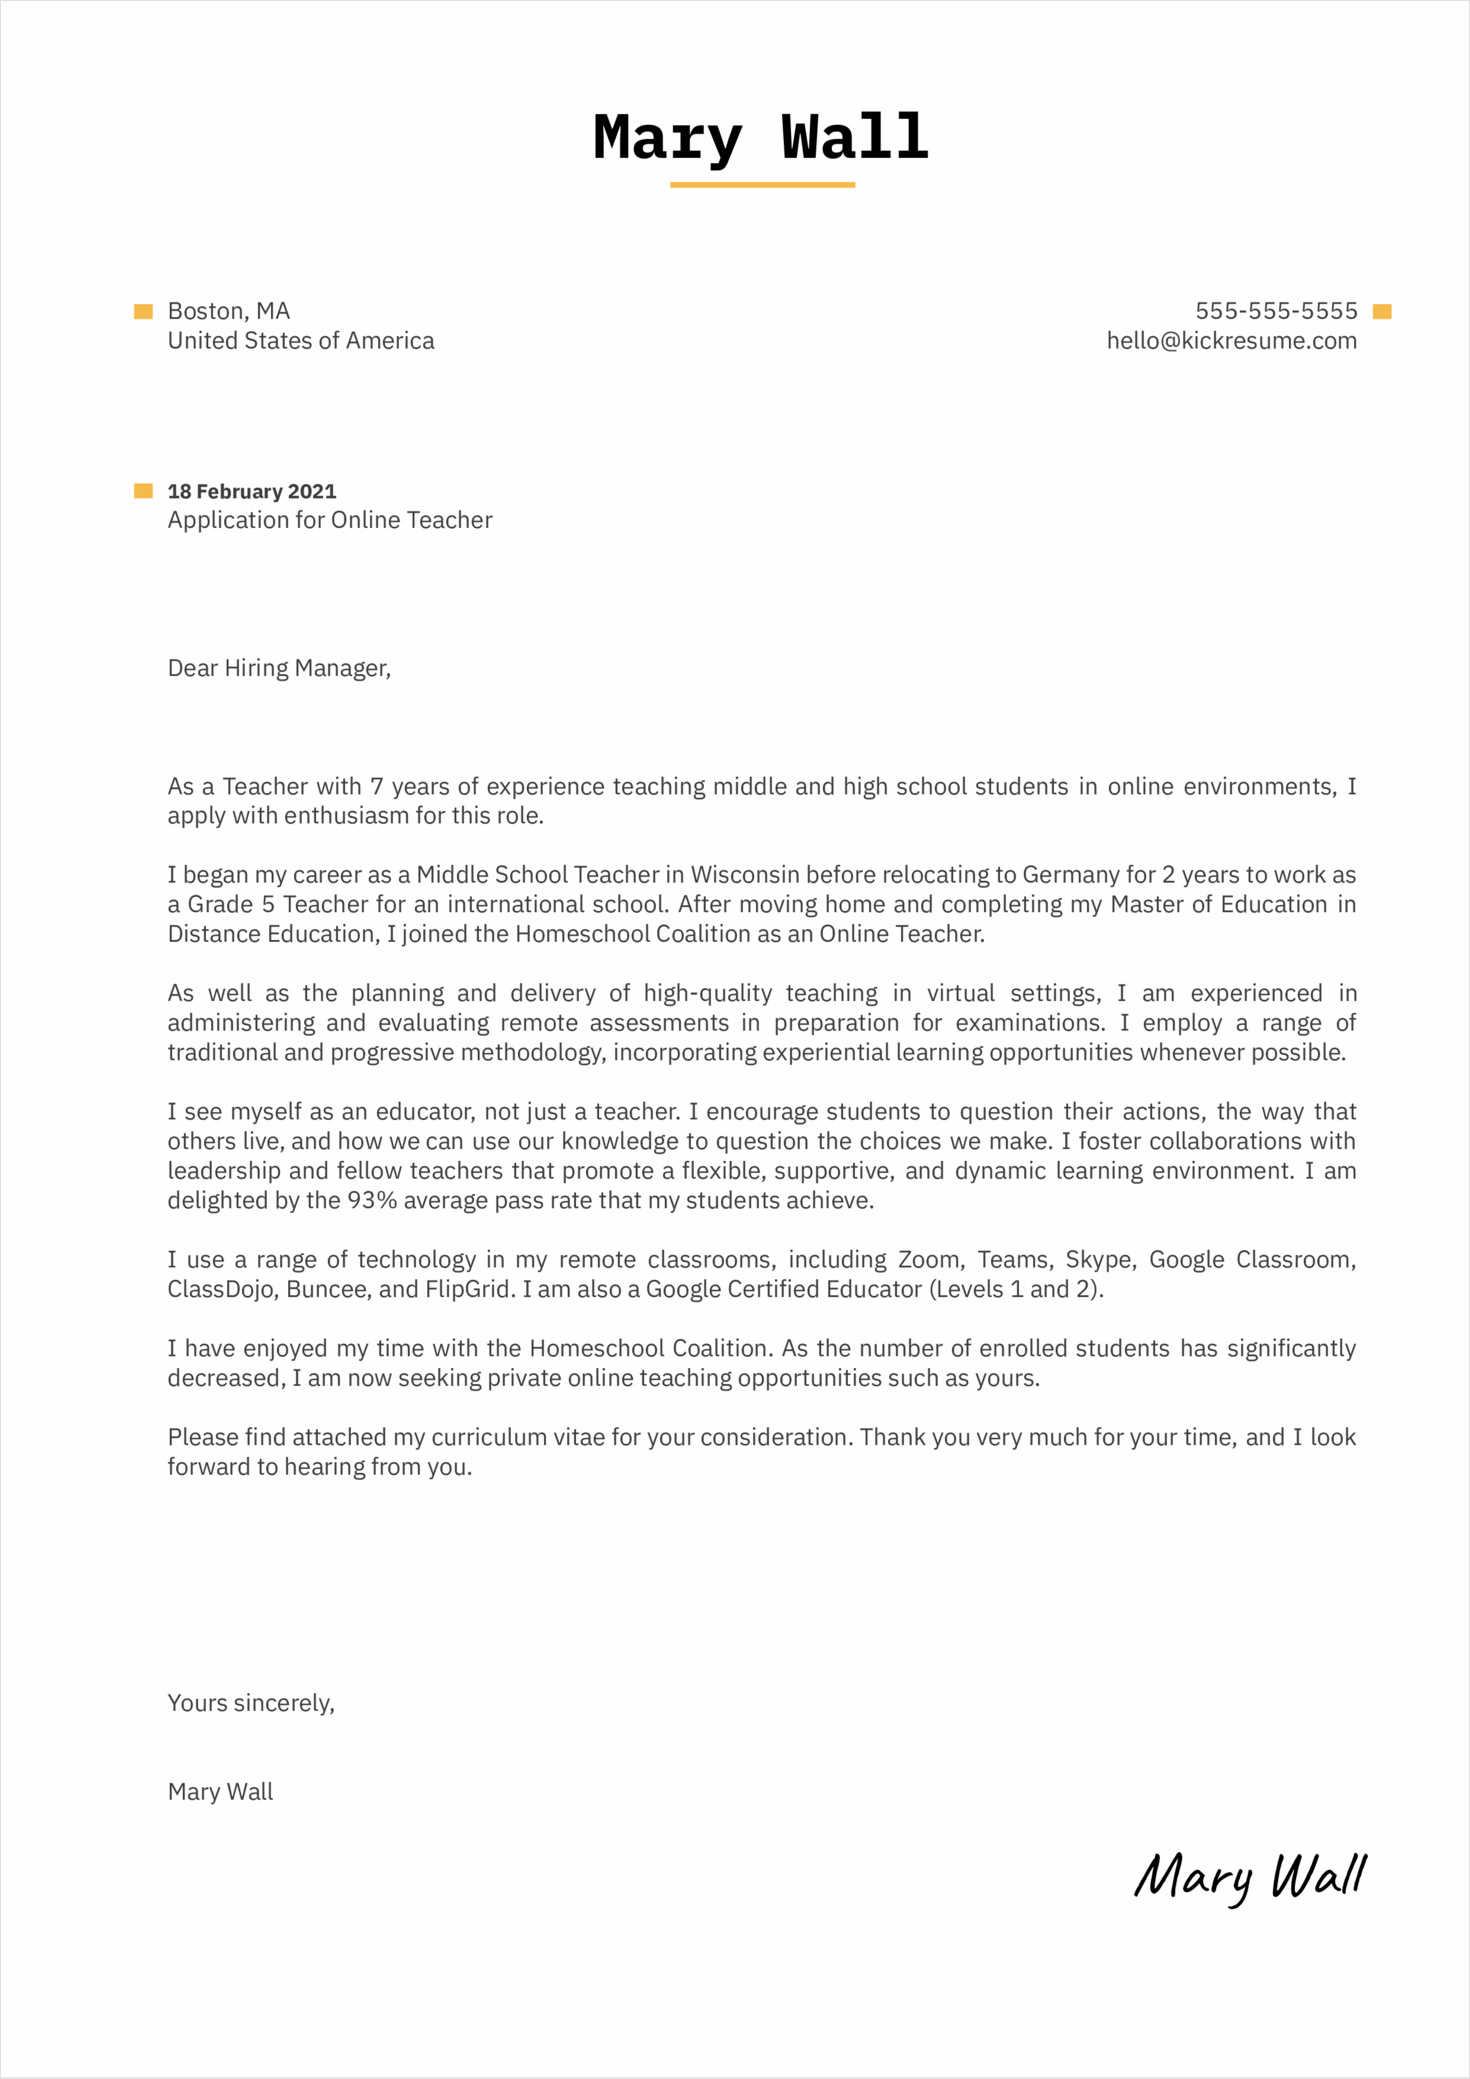 sample of teacher cover letter template with experience